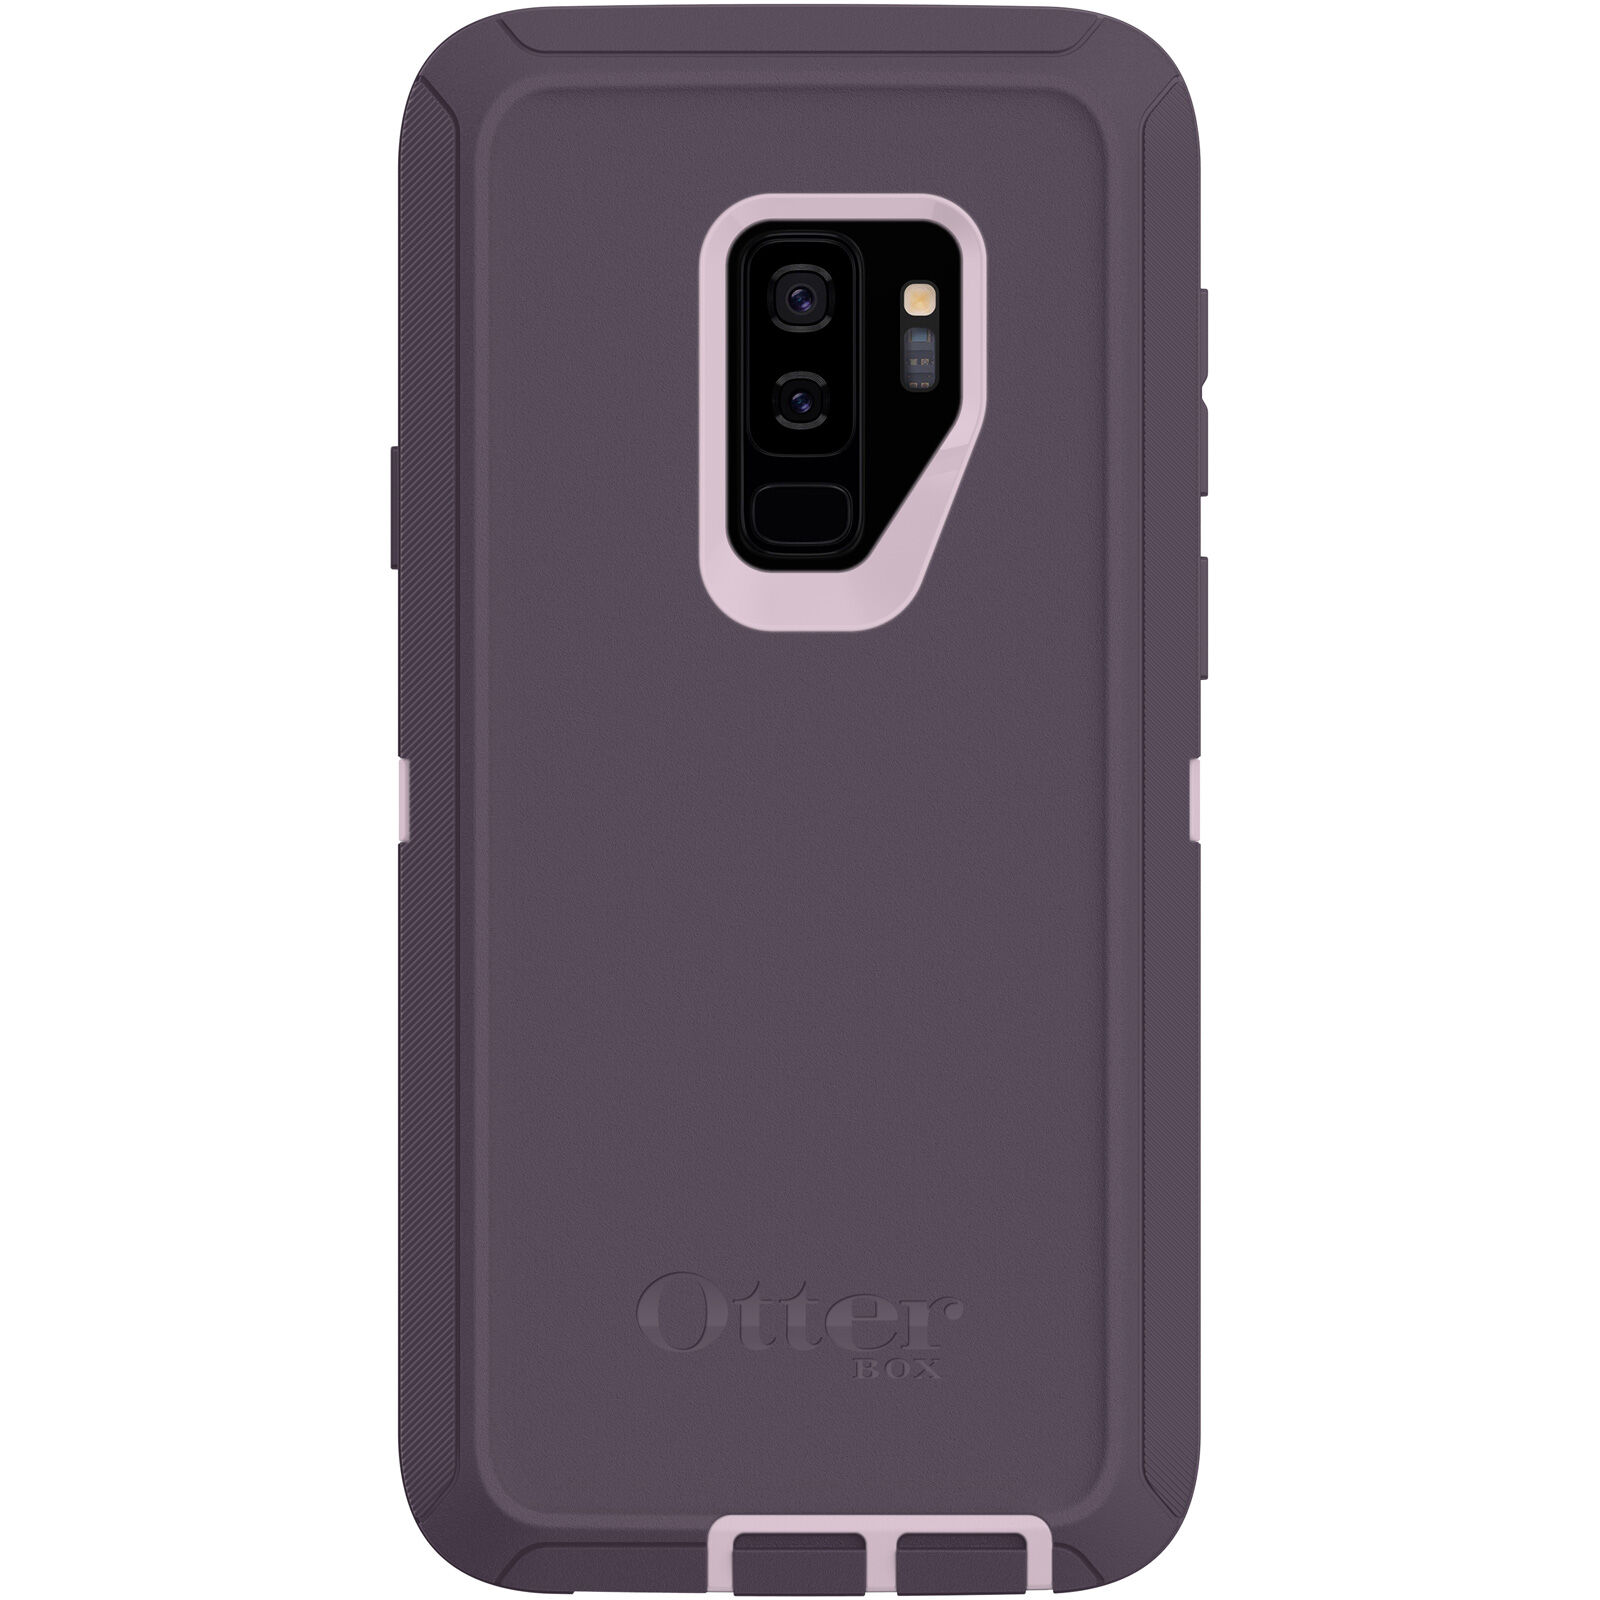 Galaxy S9+ cases from OtterBox